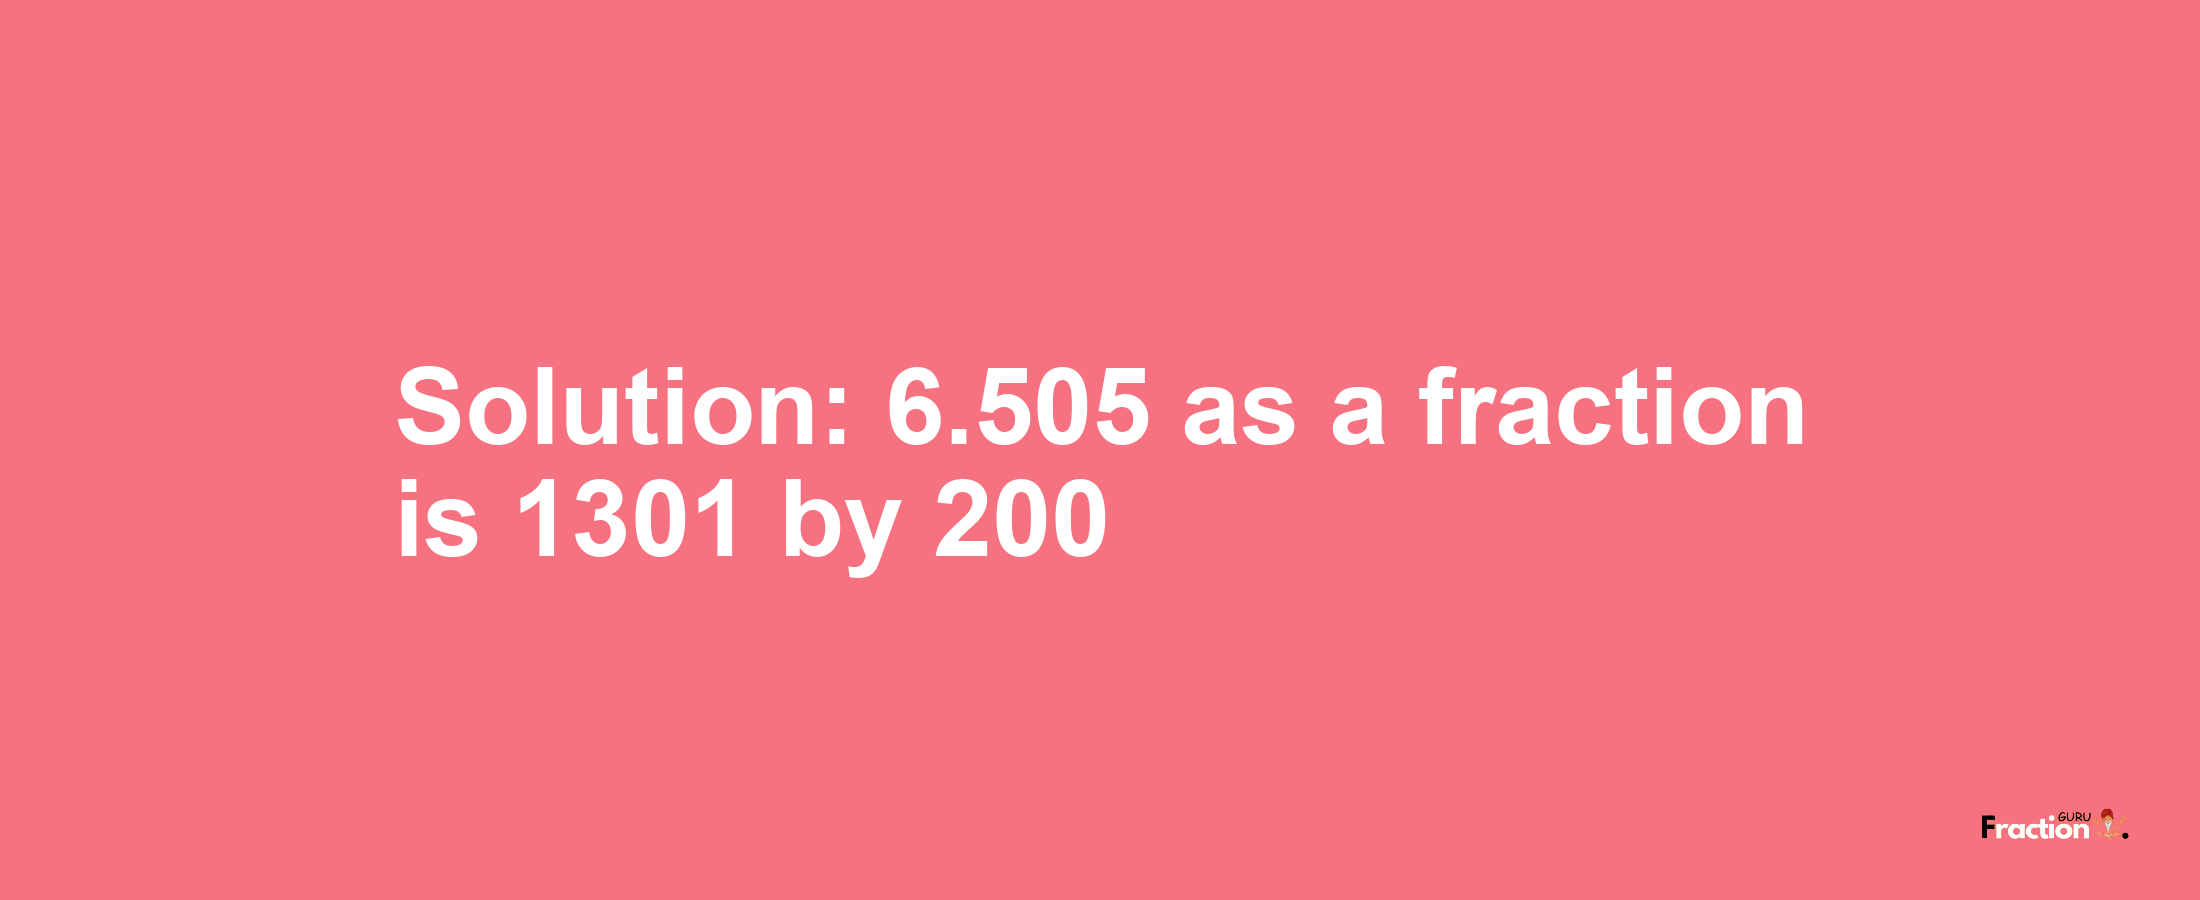 Solution:6.505 as a fraction is 1301/200